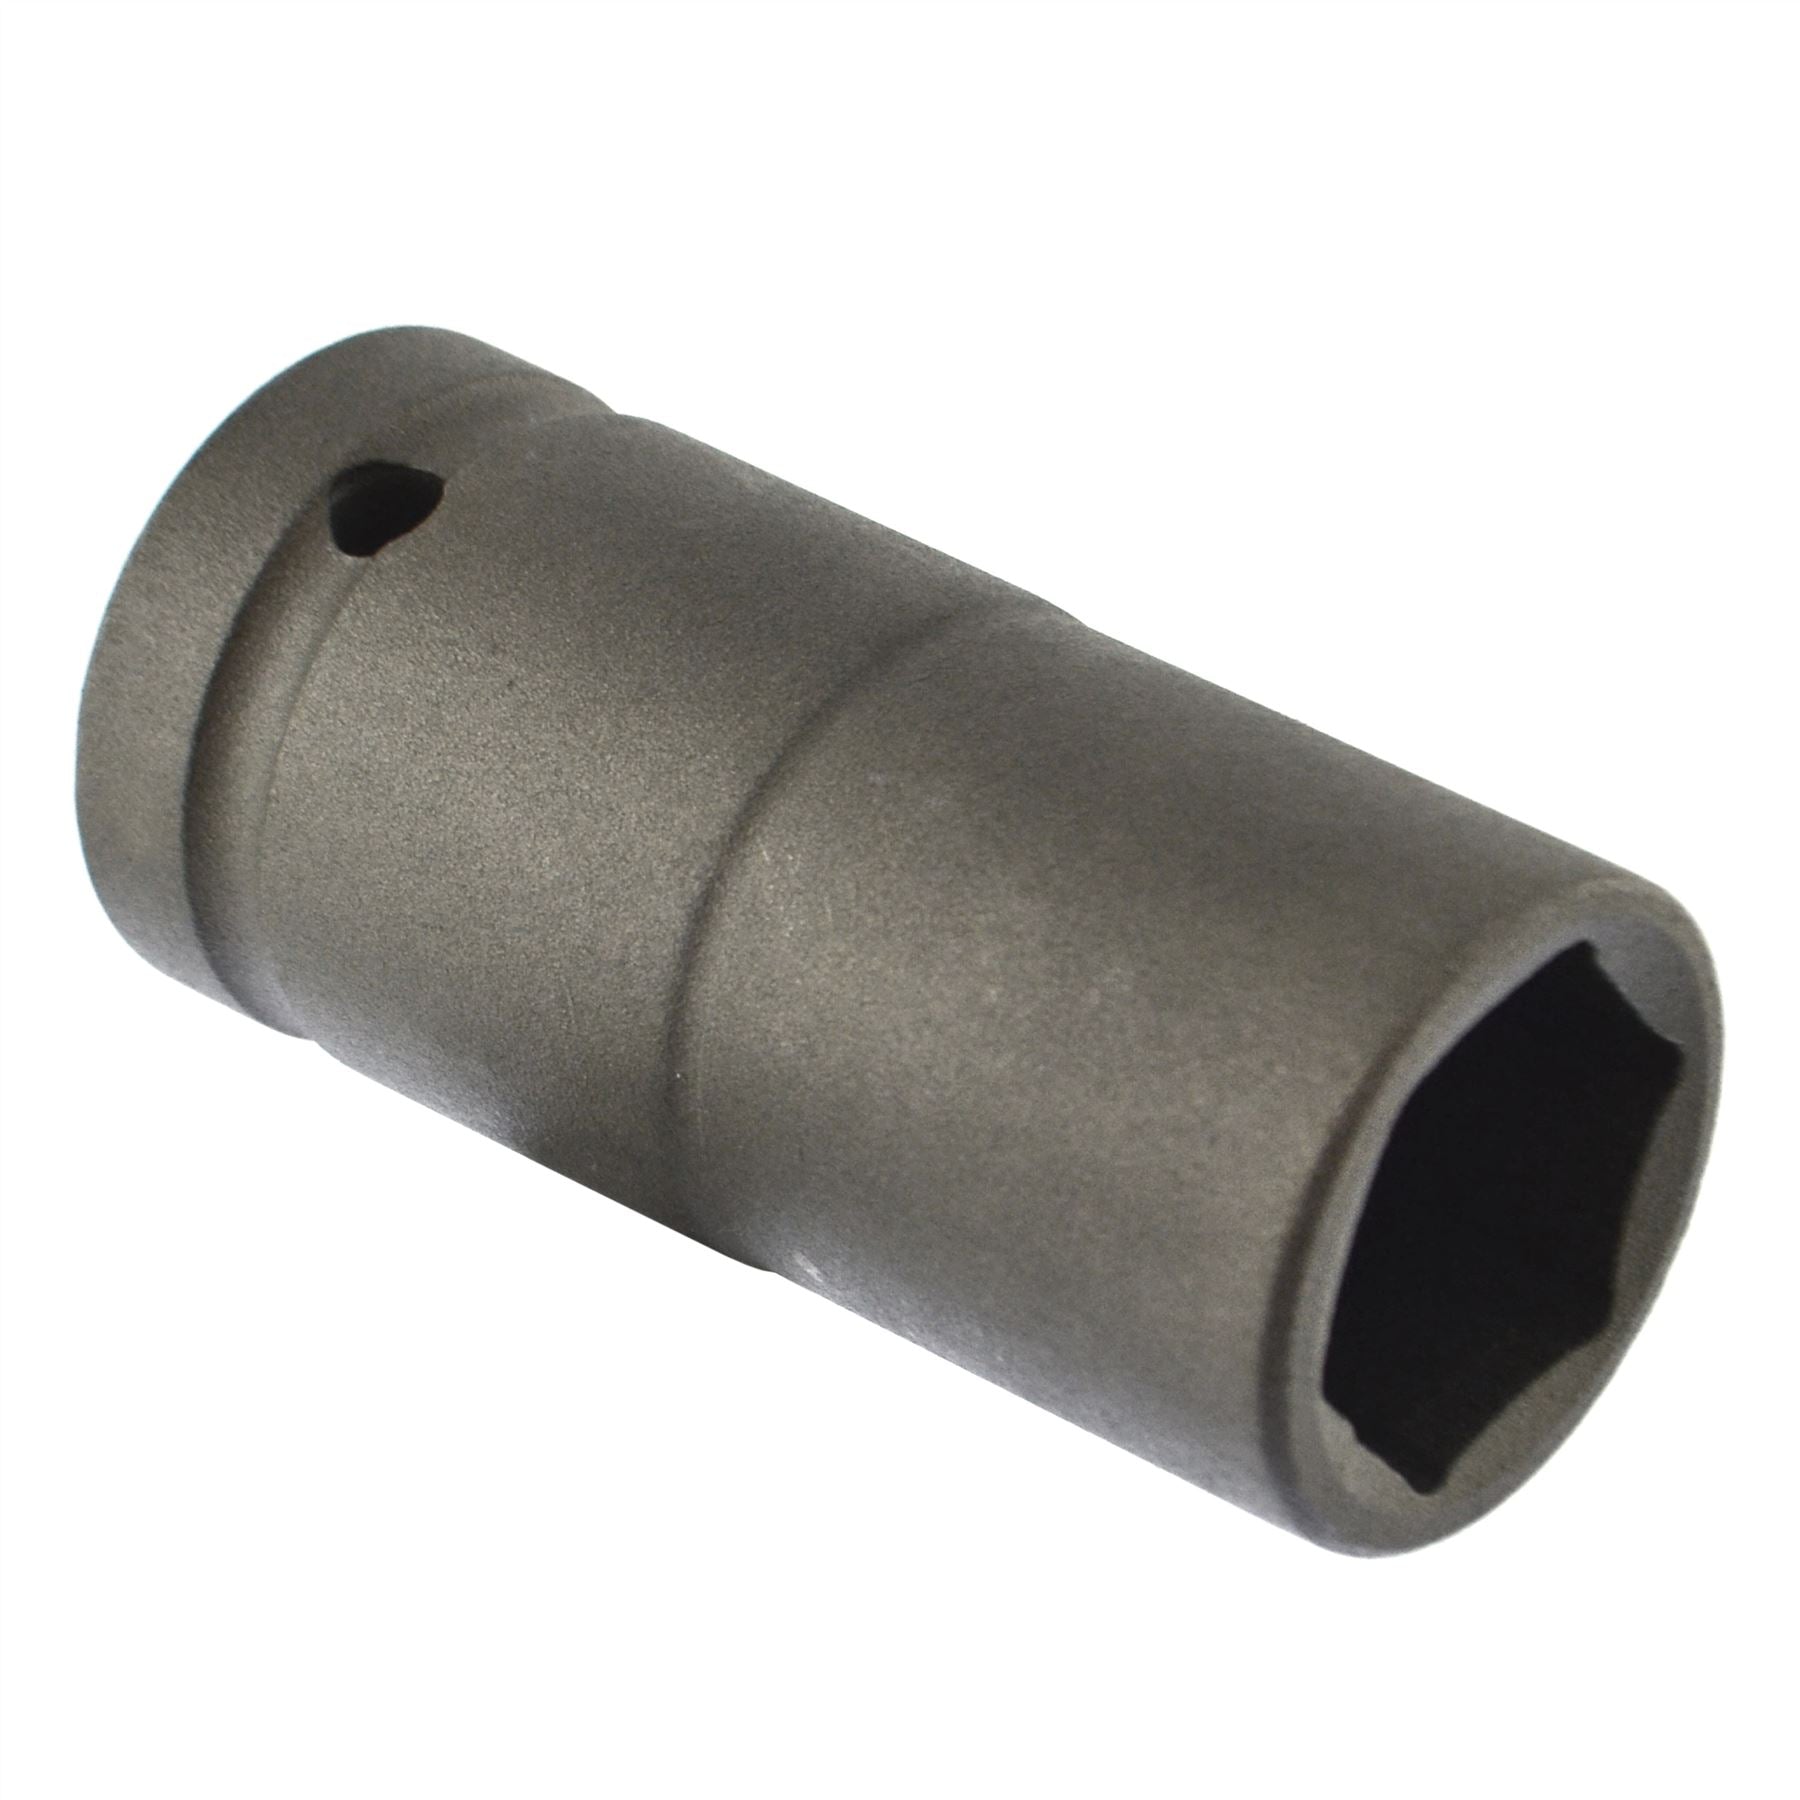 24mm Metric 3/4 Drive Double Deep Impact Socket 6 Sided Single Hex Thick Walled